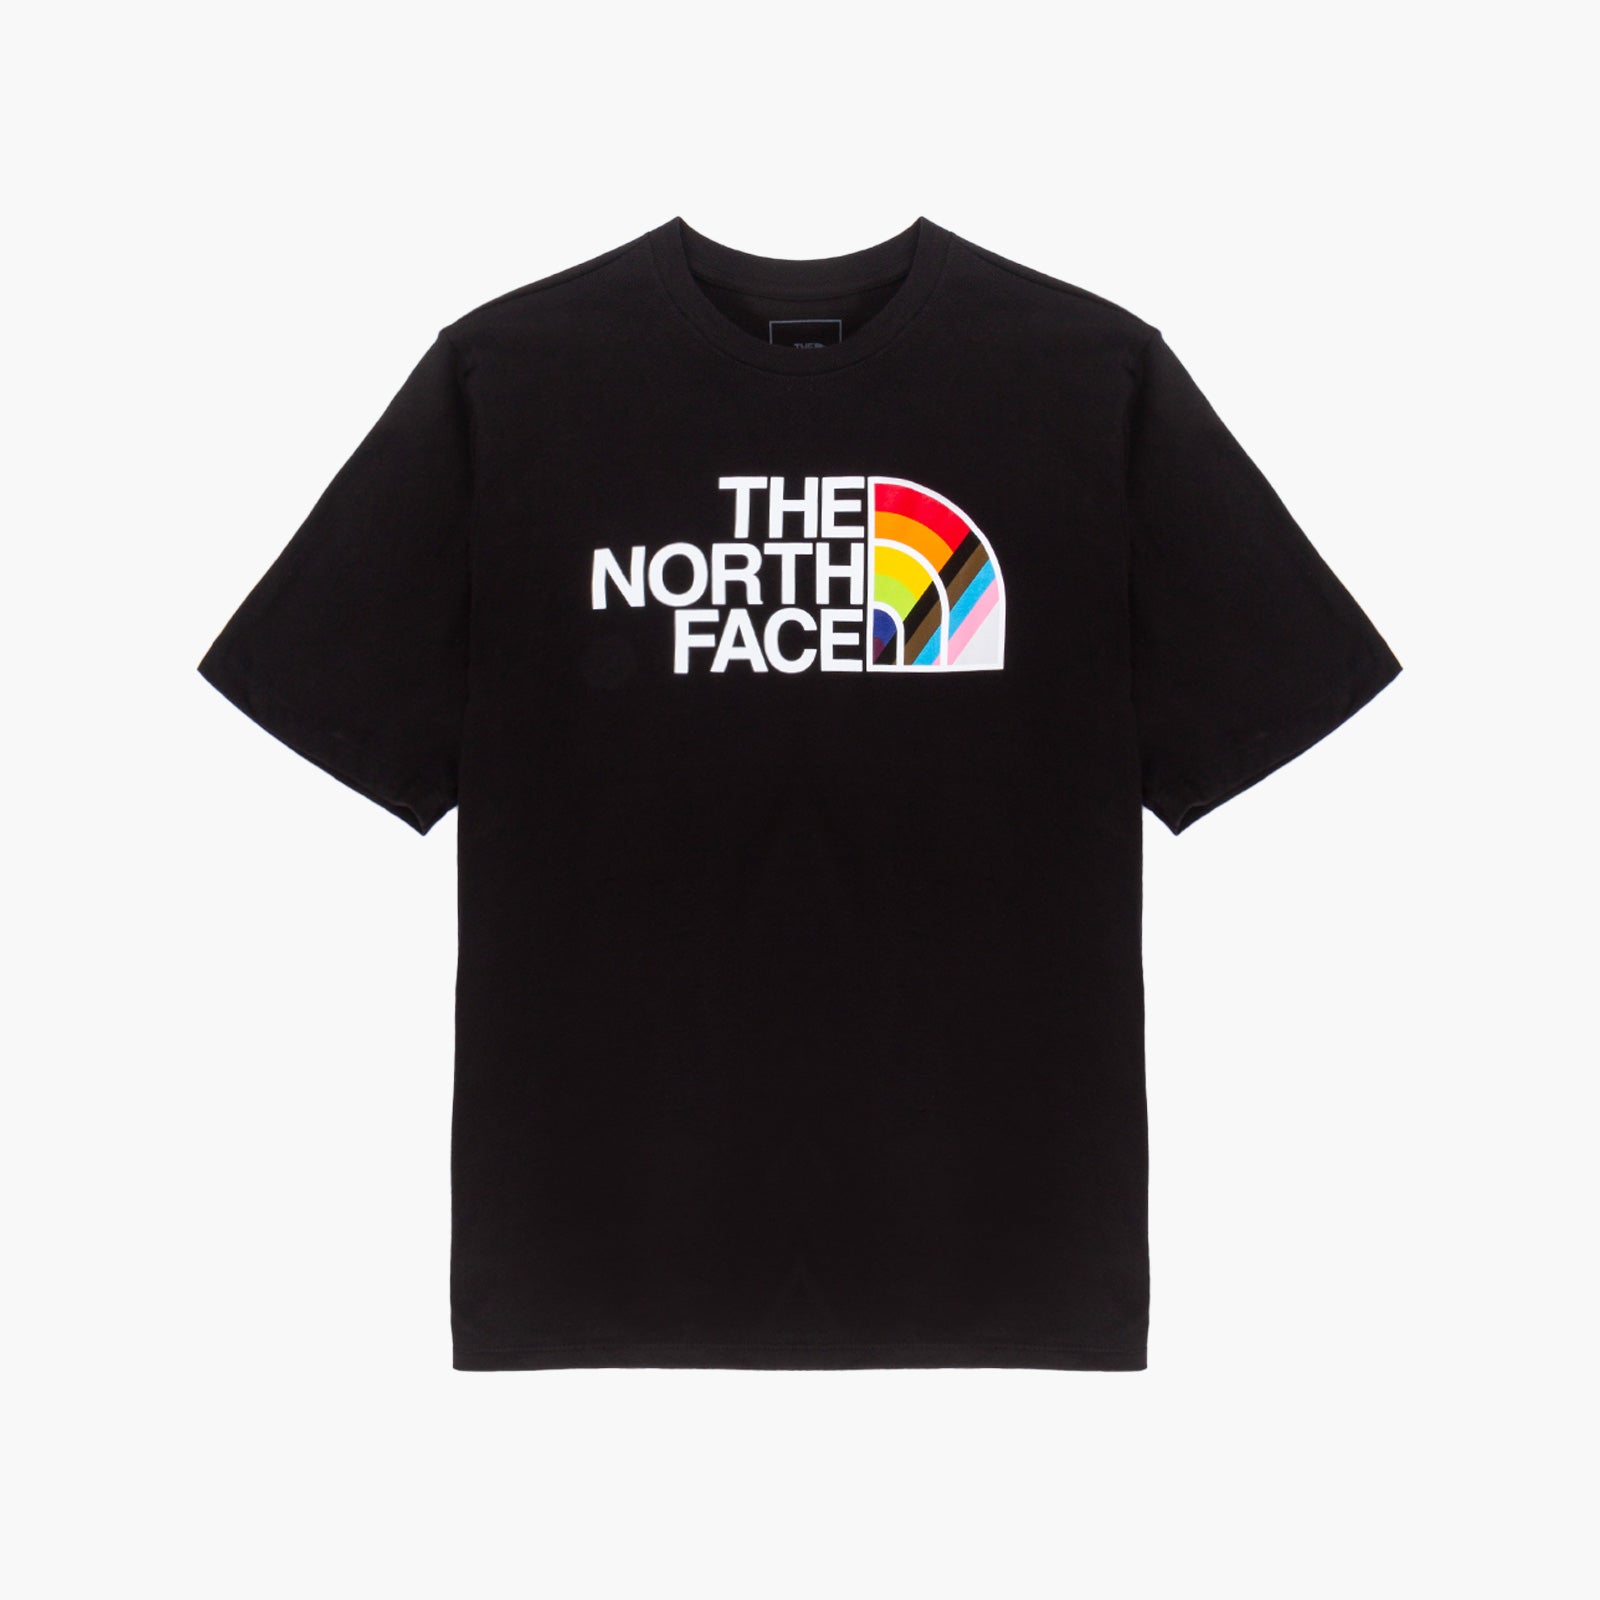 The North Face Pride T-Shirt-NF0A5J9HJK31-Black-X-Large-SUEDE Store